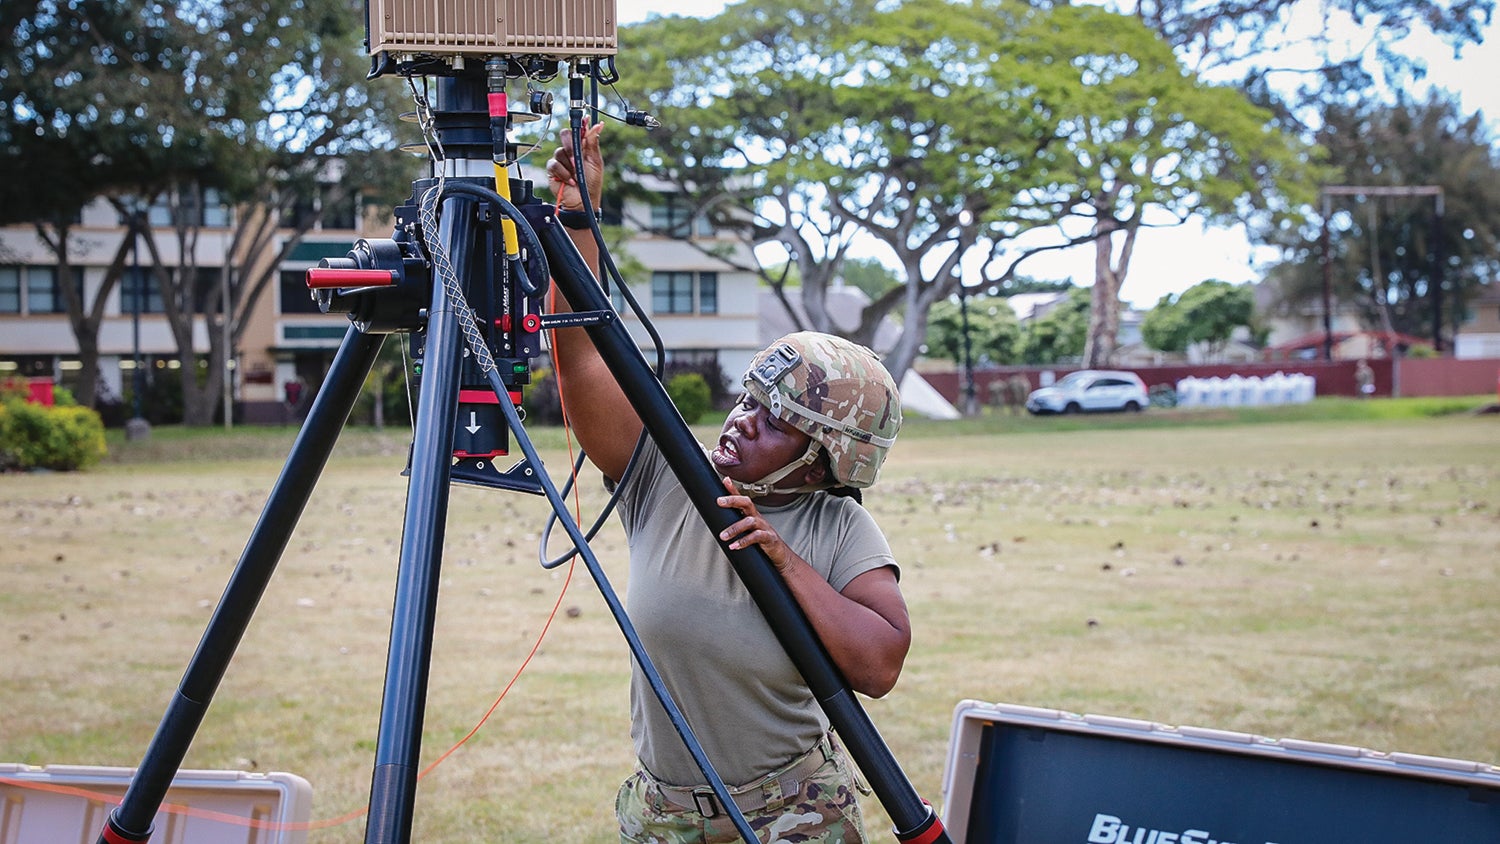 Sgt. Jayla Rogers, of the 2nd Brigade Combat Team, 25th Infantry Division, trains on a new radio system at Schofield Barracks, Hawaii. (Credit: U.S. Army/Master Sgt. Lekendrick Stallworth)